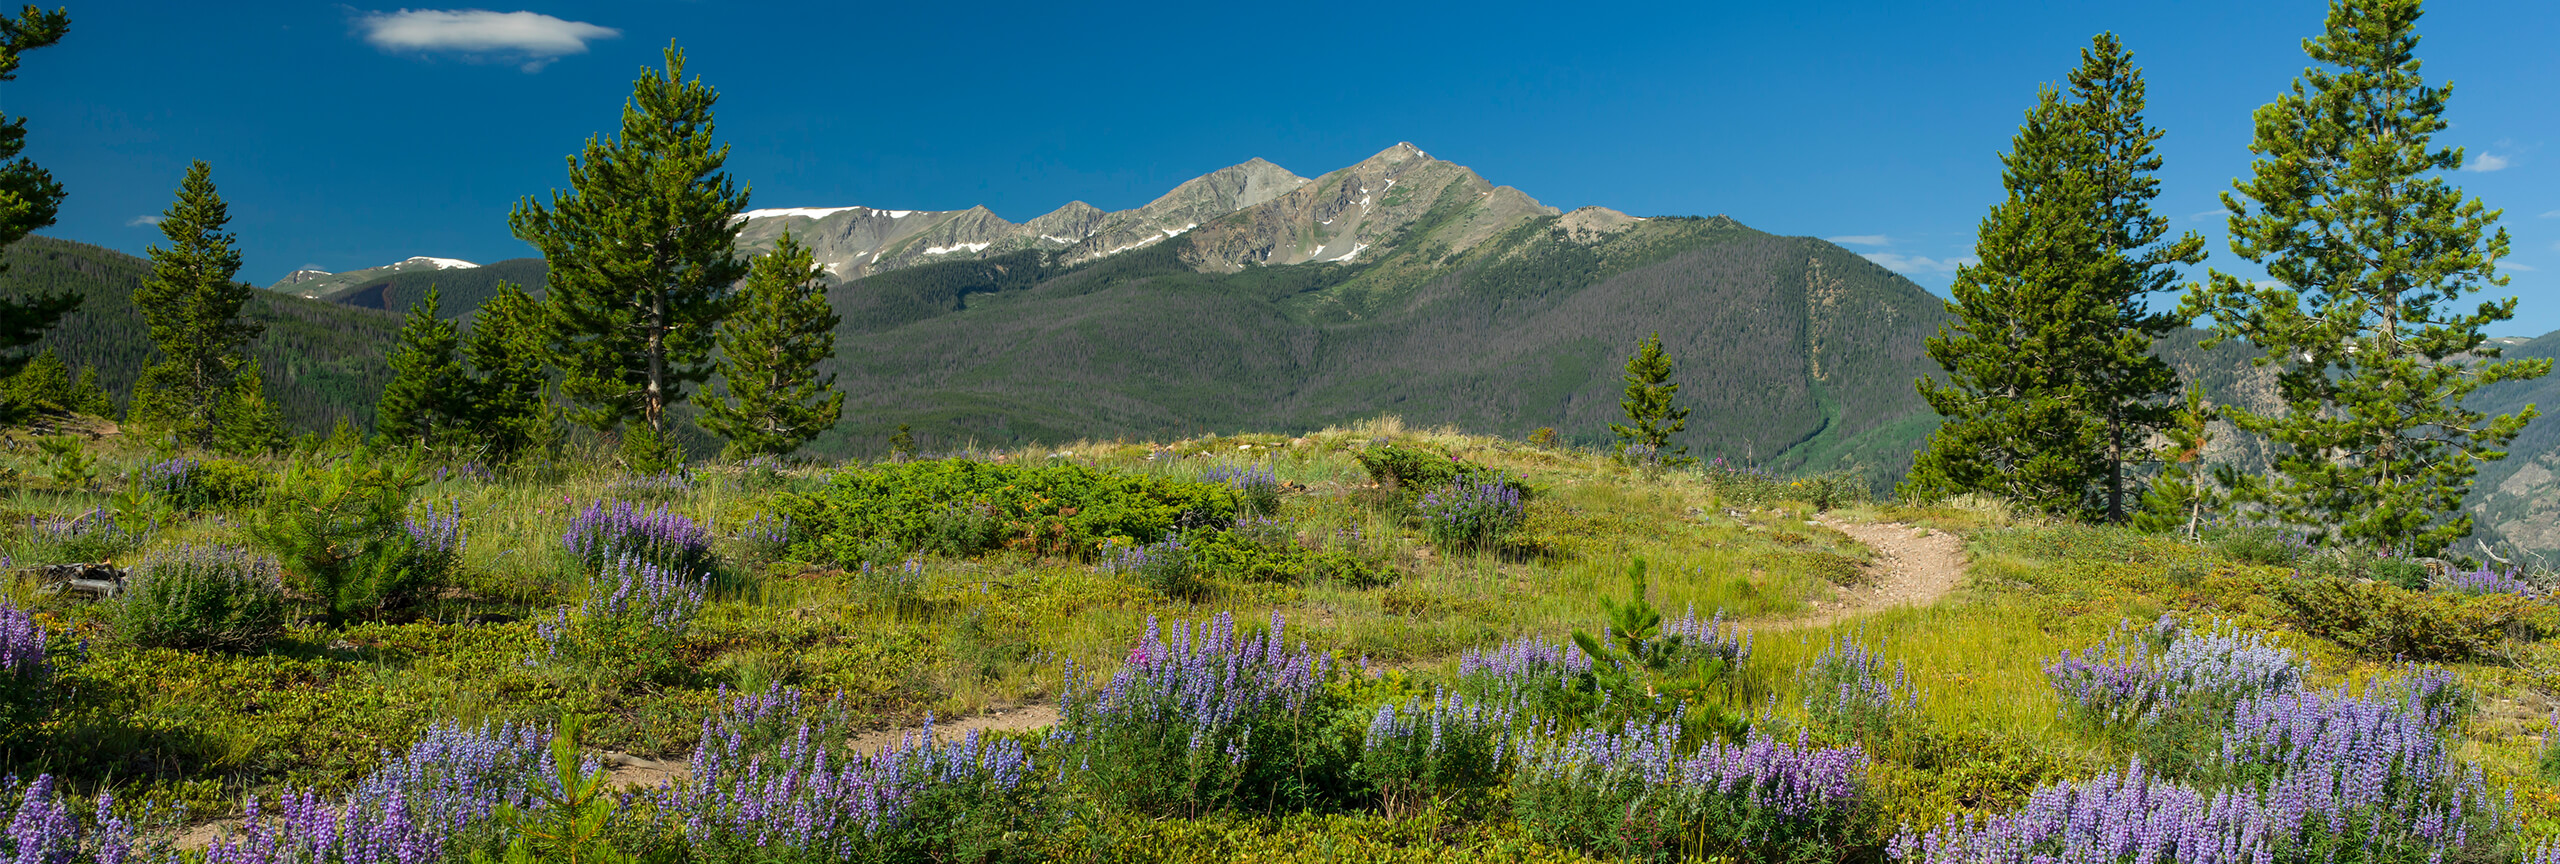 Trail on Frisco Peninsula with wildflowers and Peak One in background